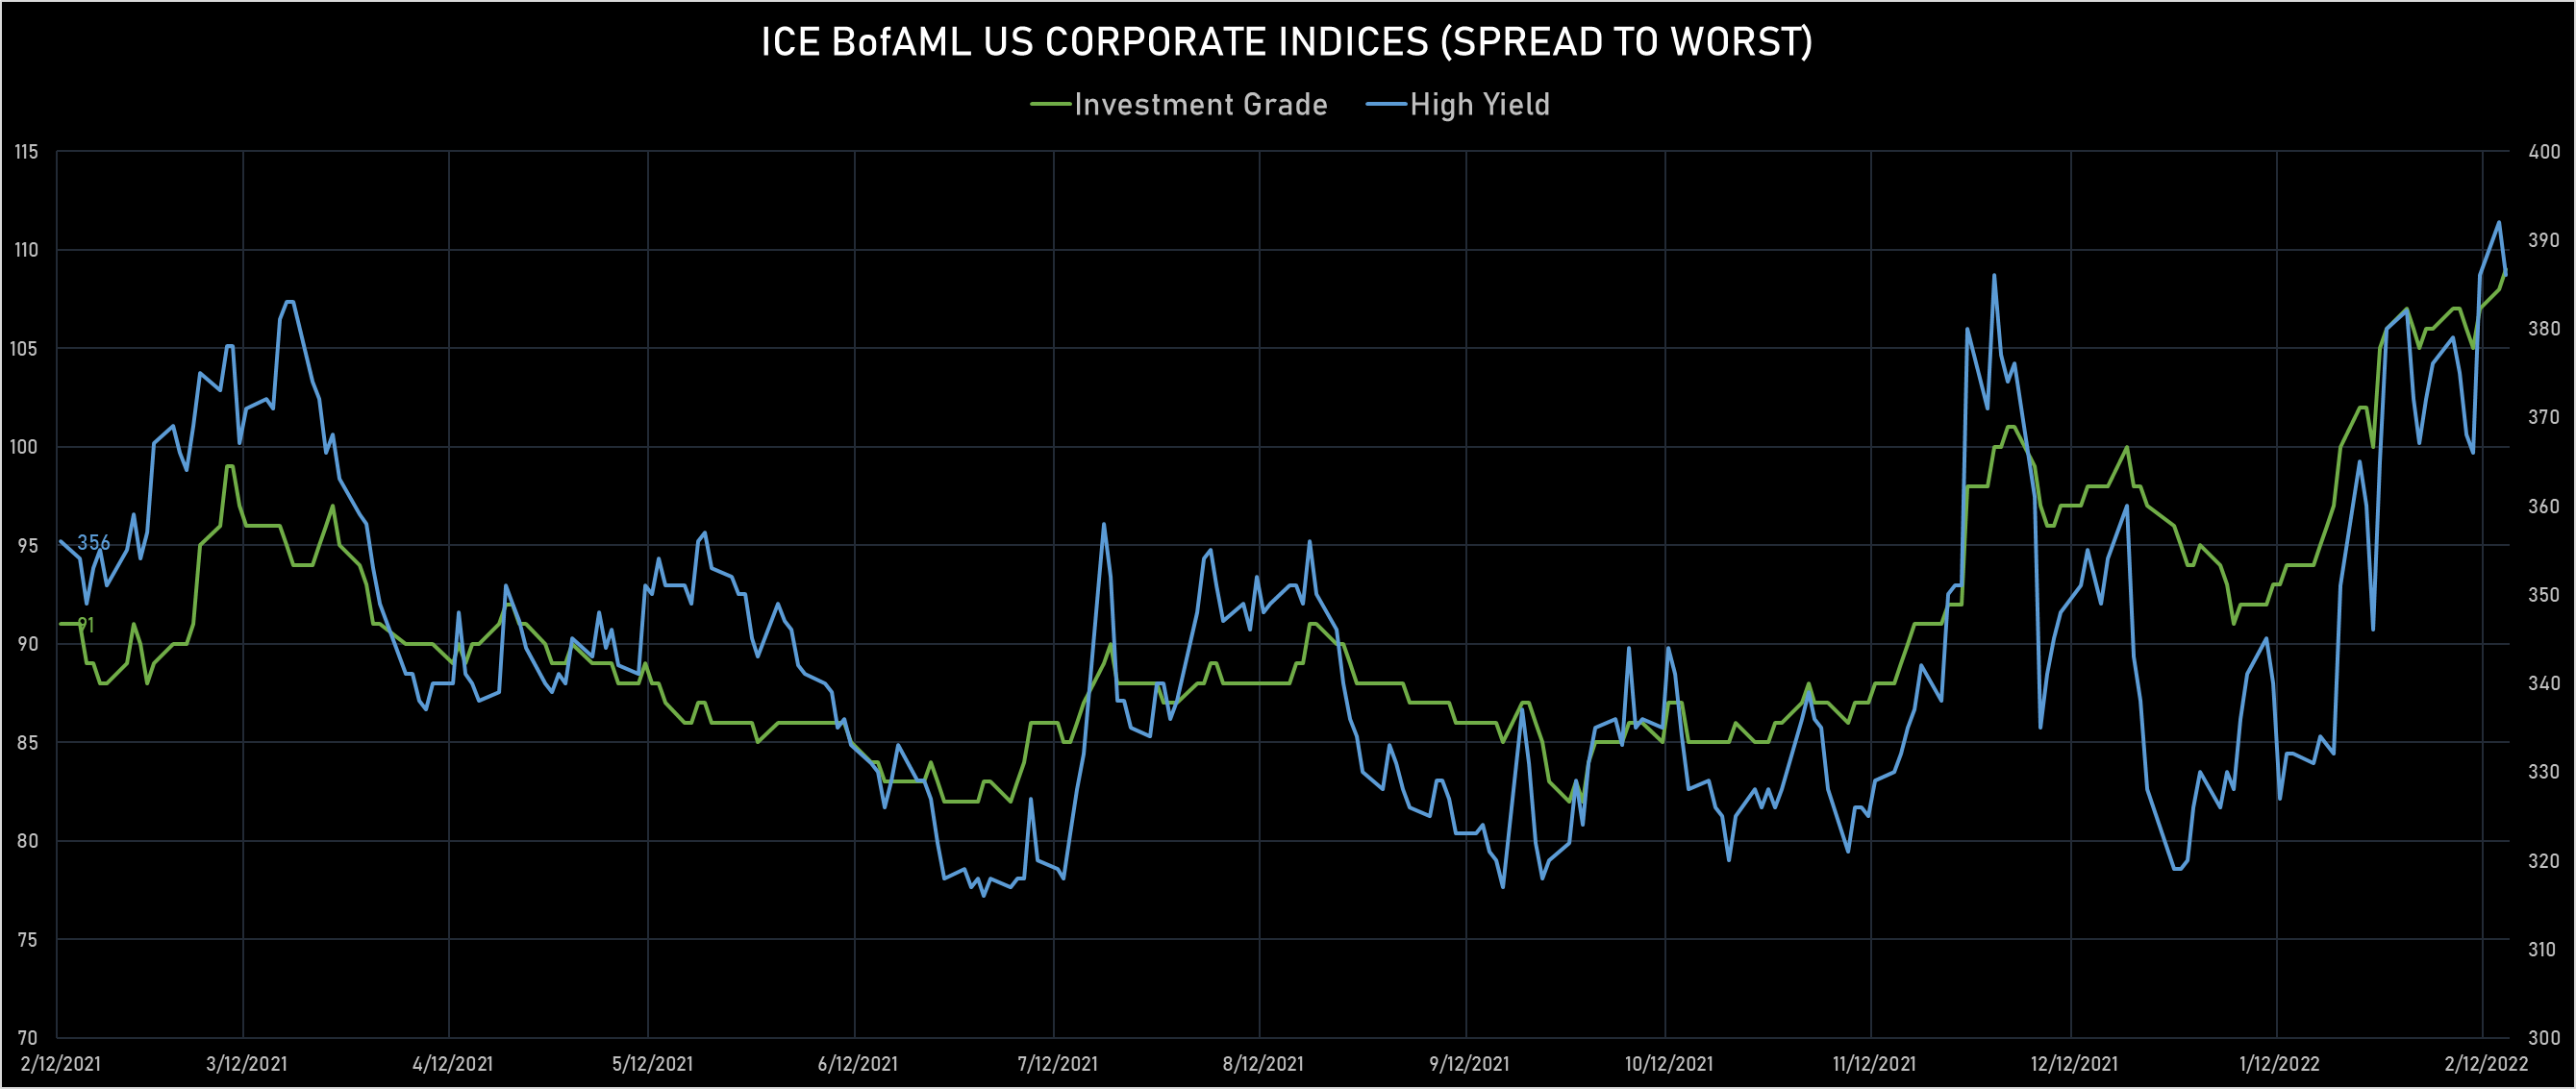 ICE BofAML US Corporate IG & HY Spreads to Worst | Sources: phipost.com, Refinitiv data